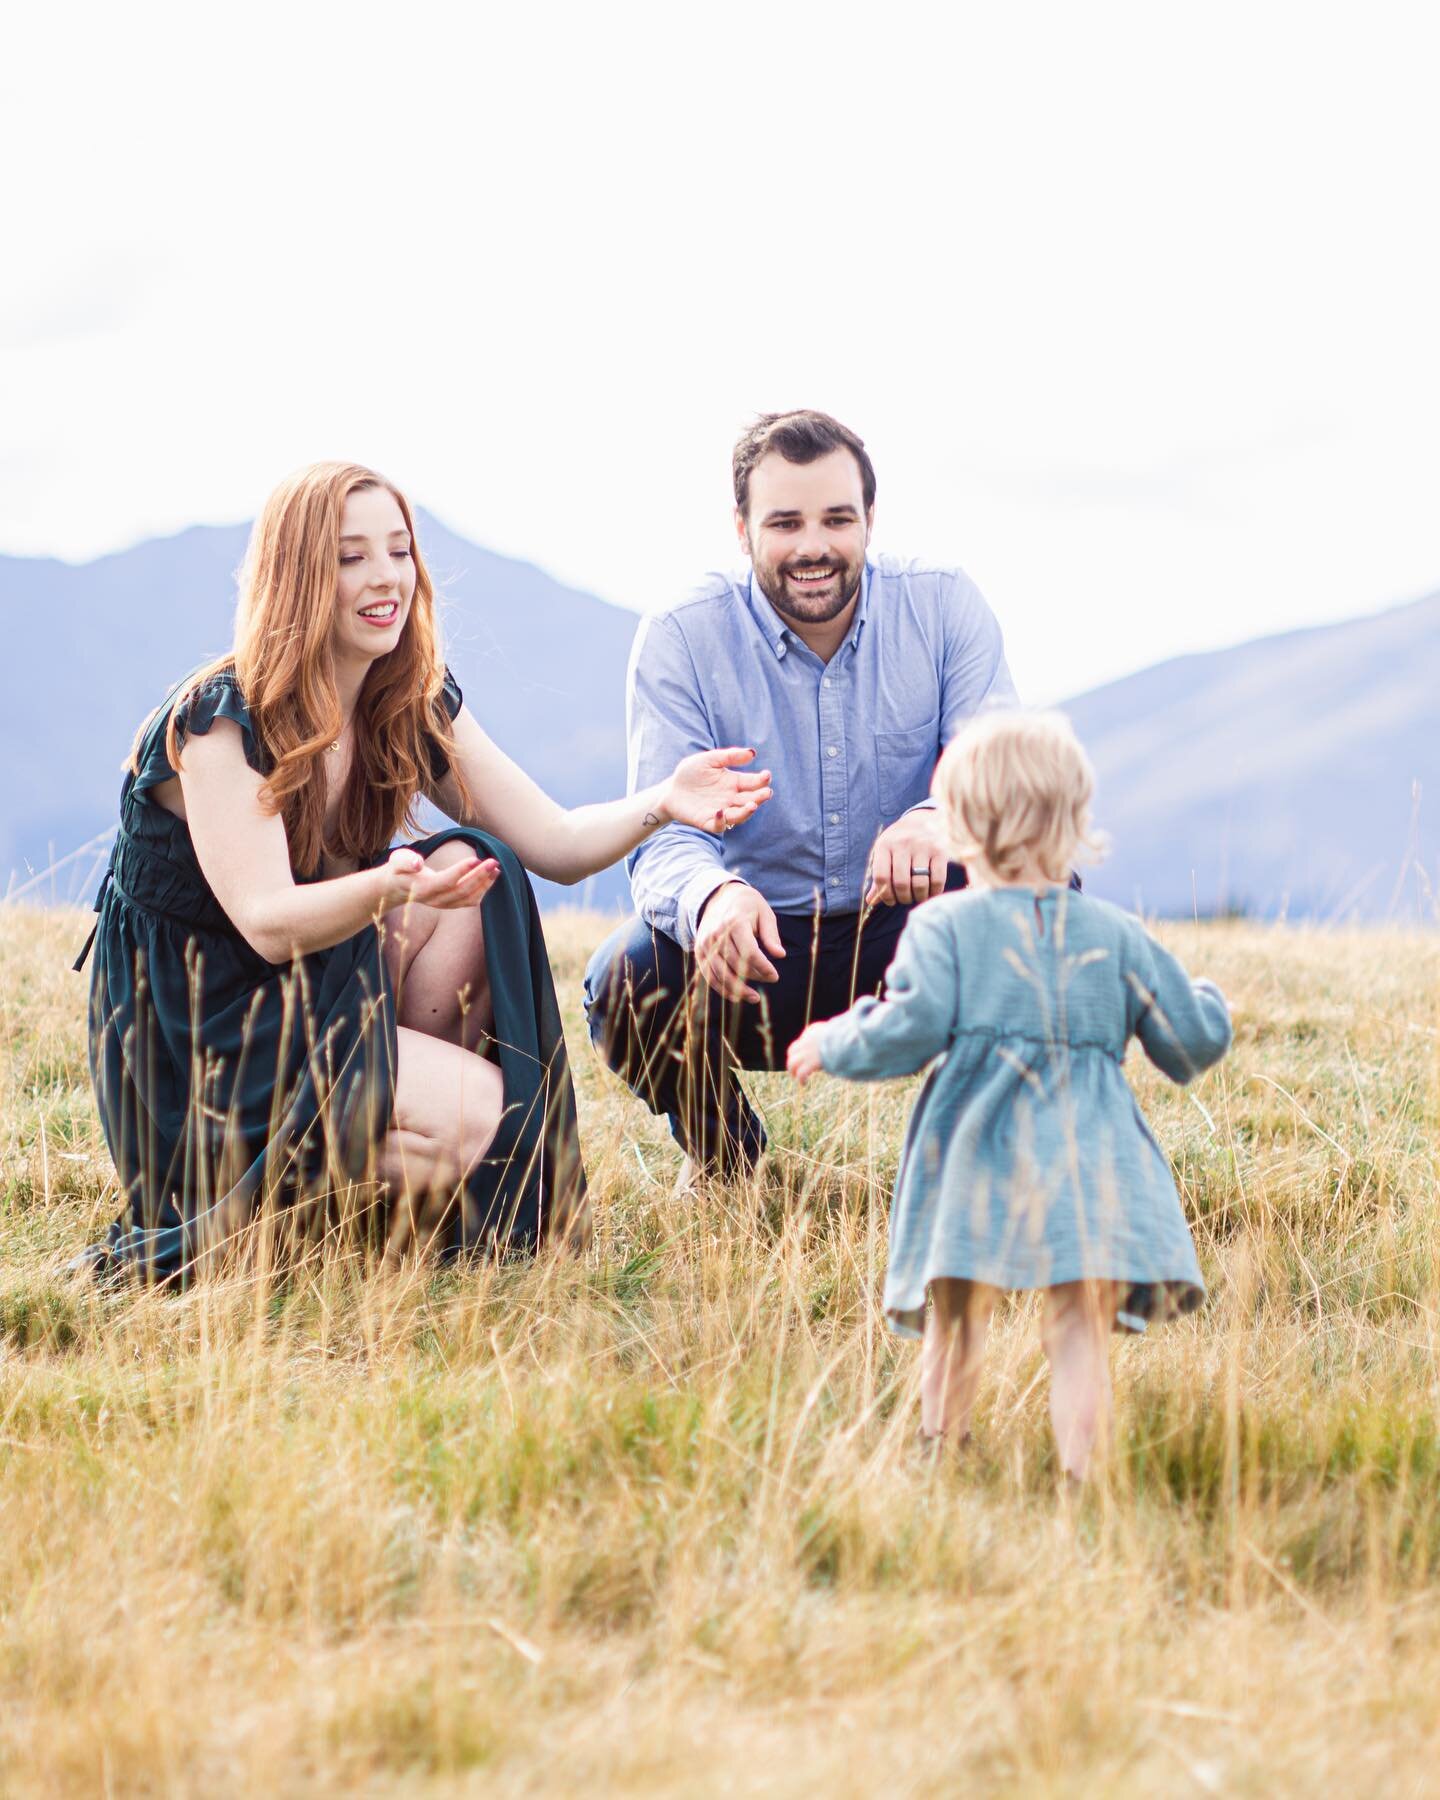 &ldquo; Amidst the dancing wildflowers and the majestic mountains, our love blooms, reaching out to embrace the joy that is our little one.&rdquo; - Unknown 

#FamilyPhotography #MountainFamily #meadowmoments moments #NZ #NewZealandFamily #NatureBond